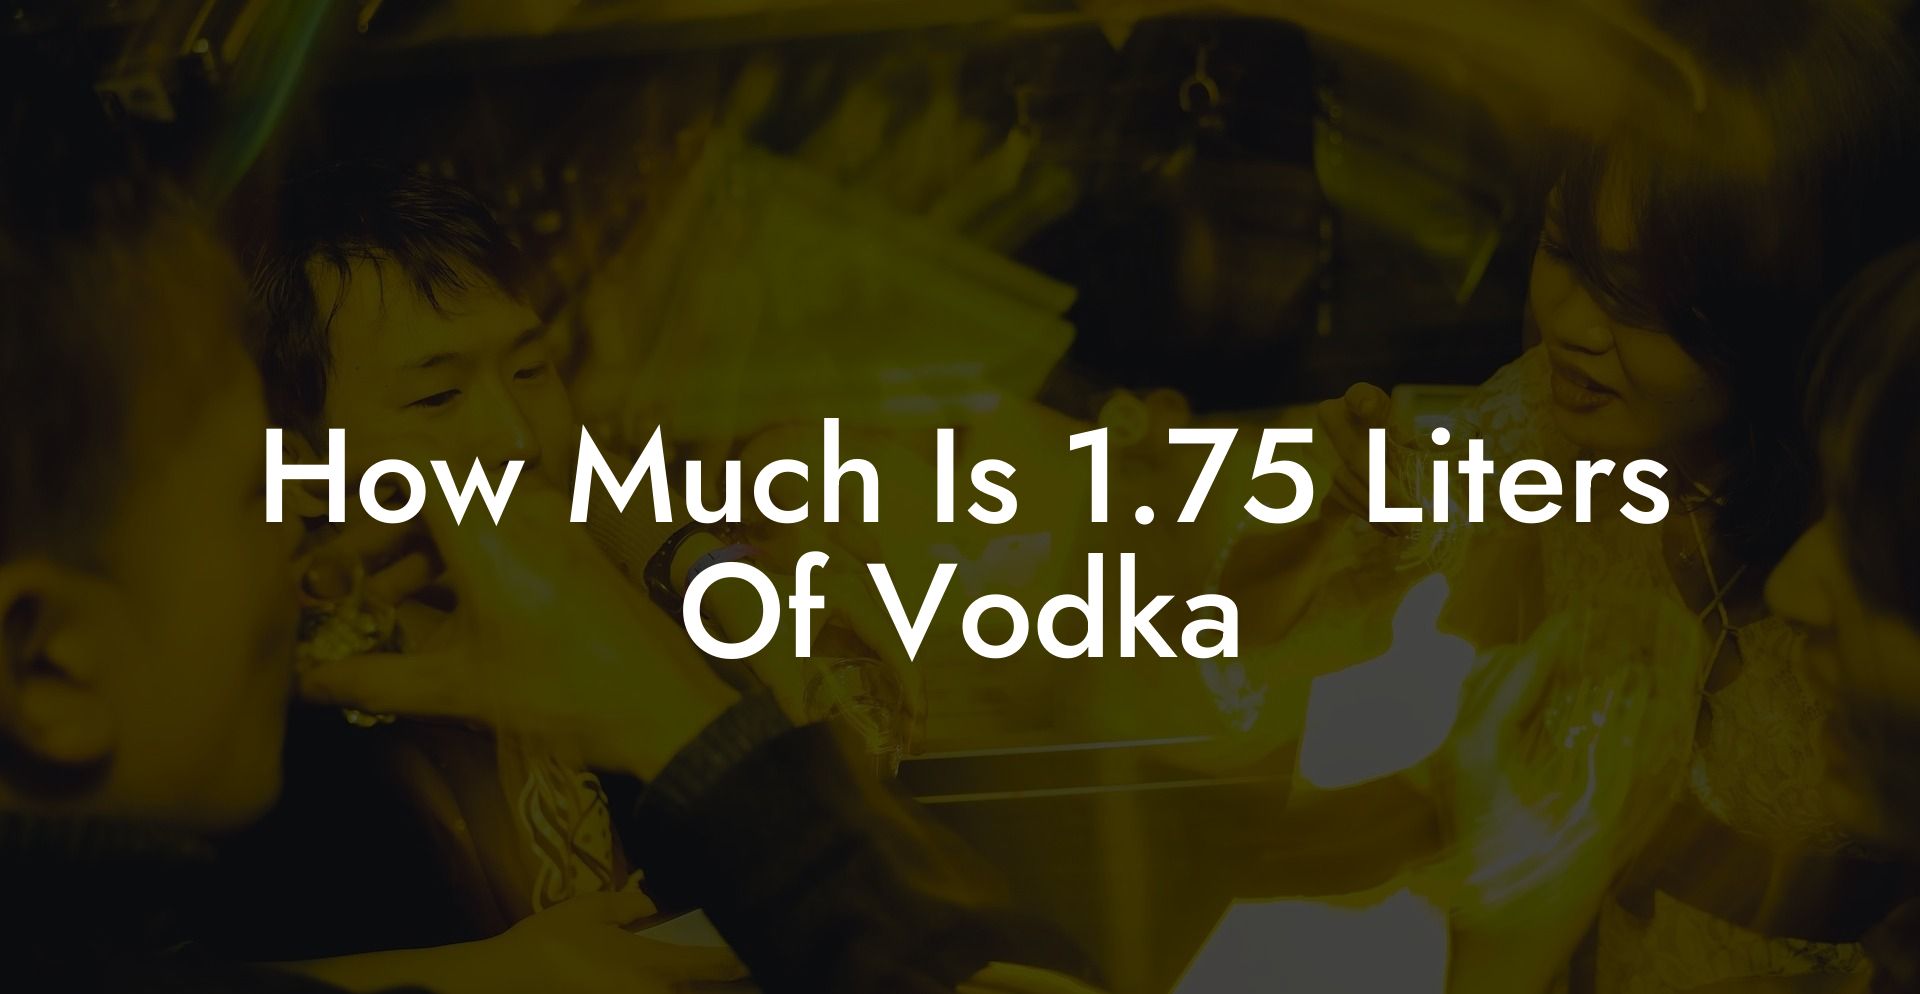 How Much Is 1.75 Liters Of Vodka